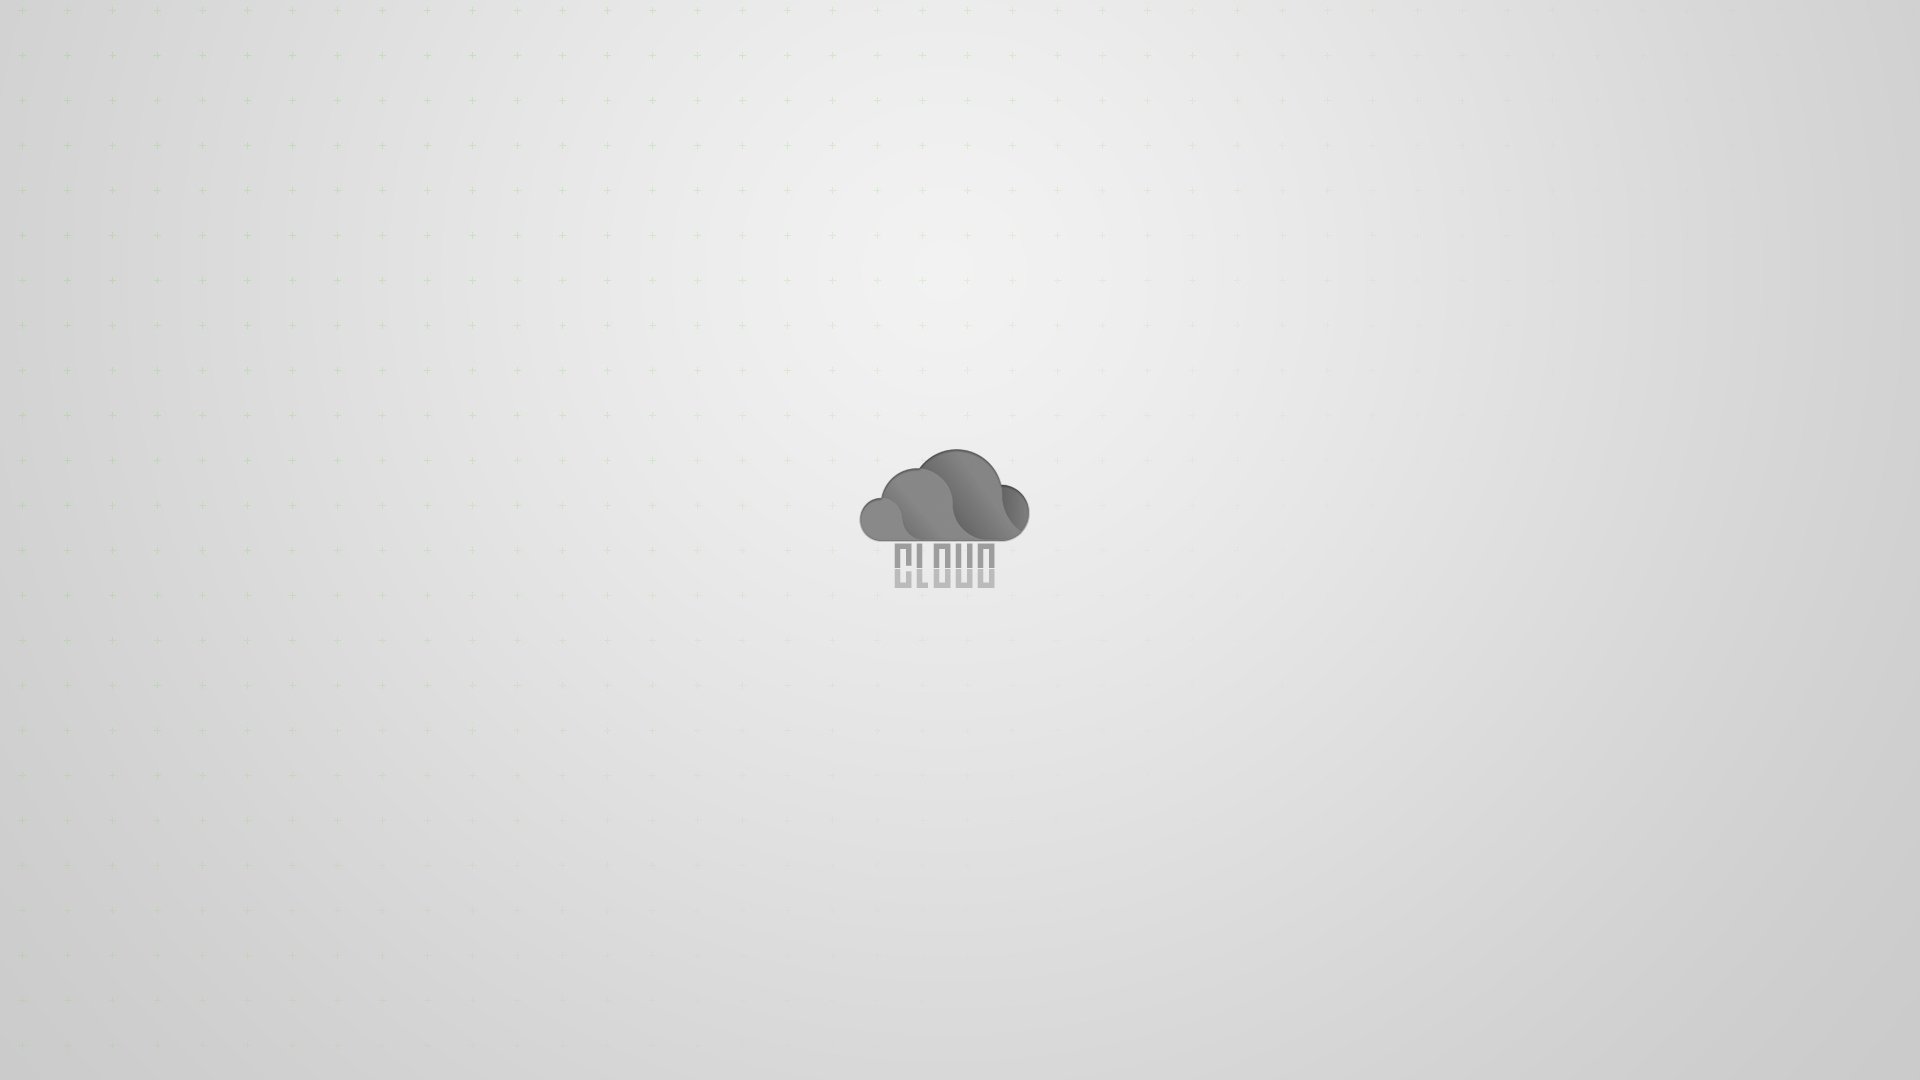 clouds, Word clouds, Minimalism, Simple background, Backgound Wallpaper